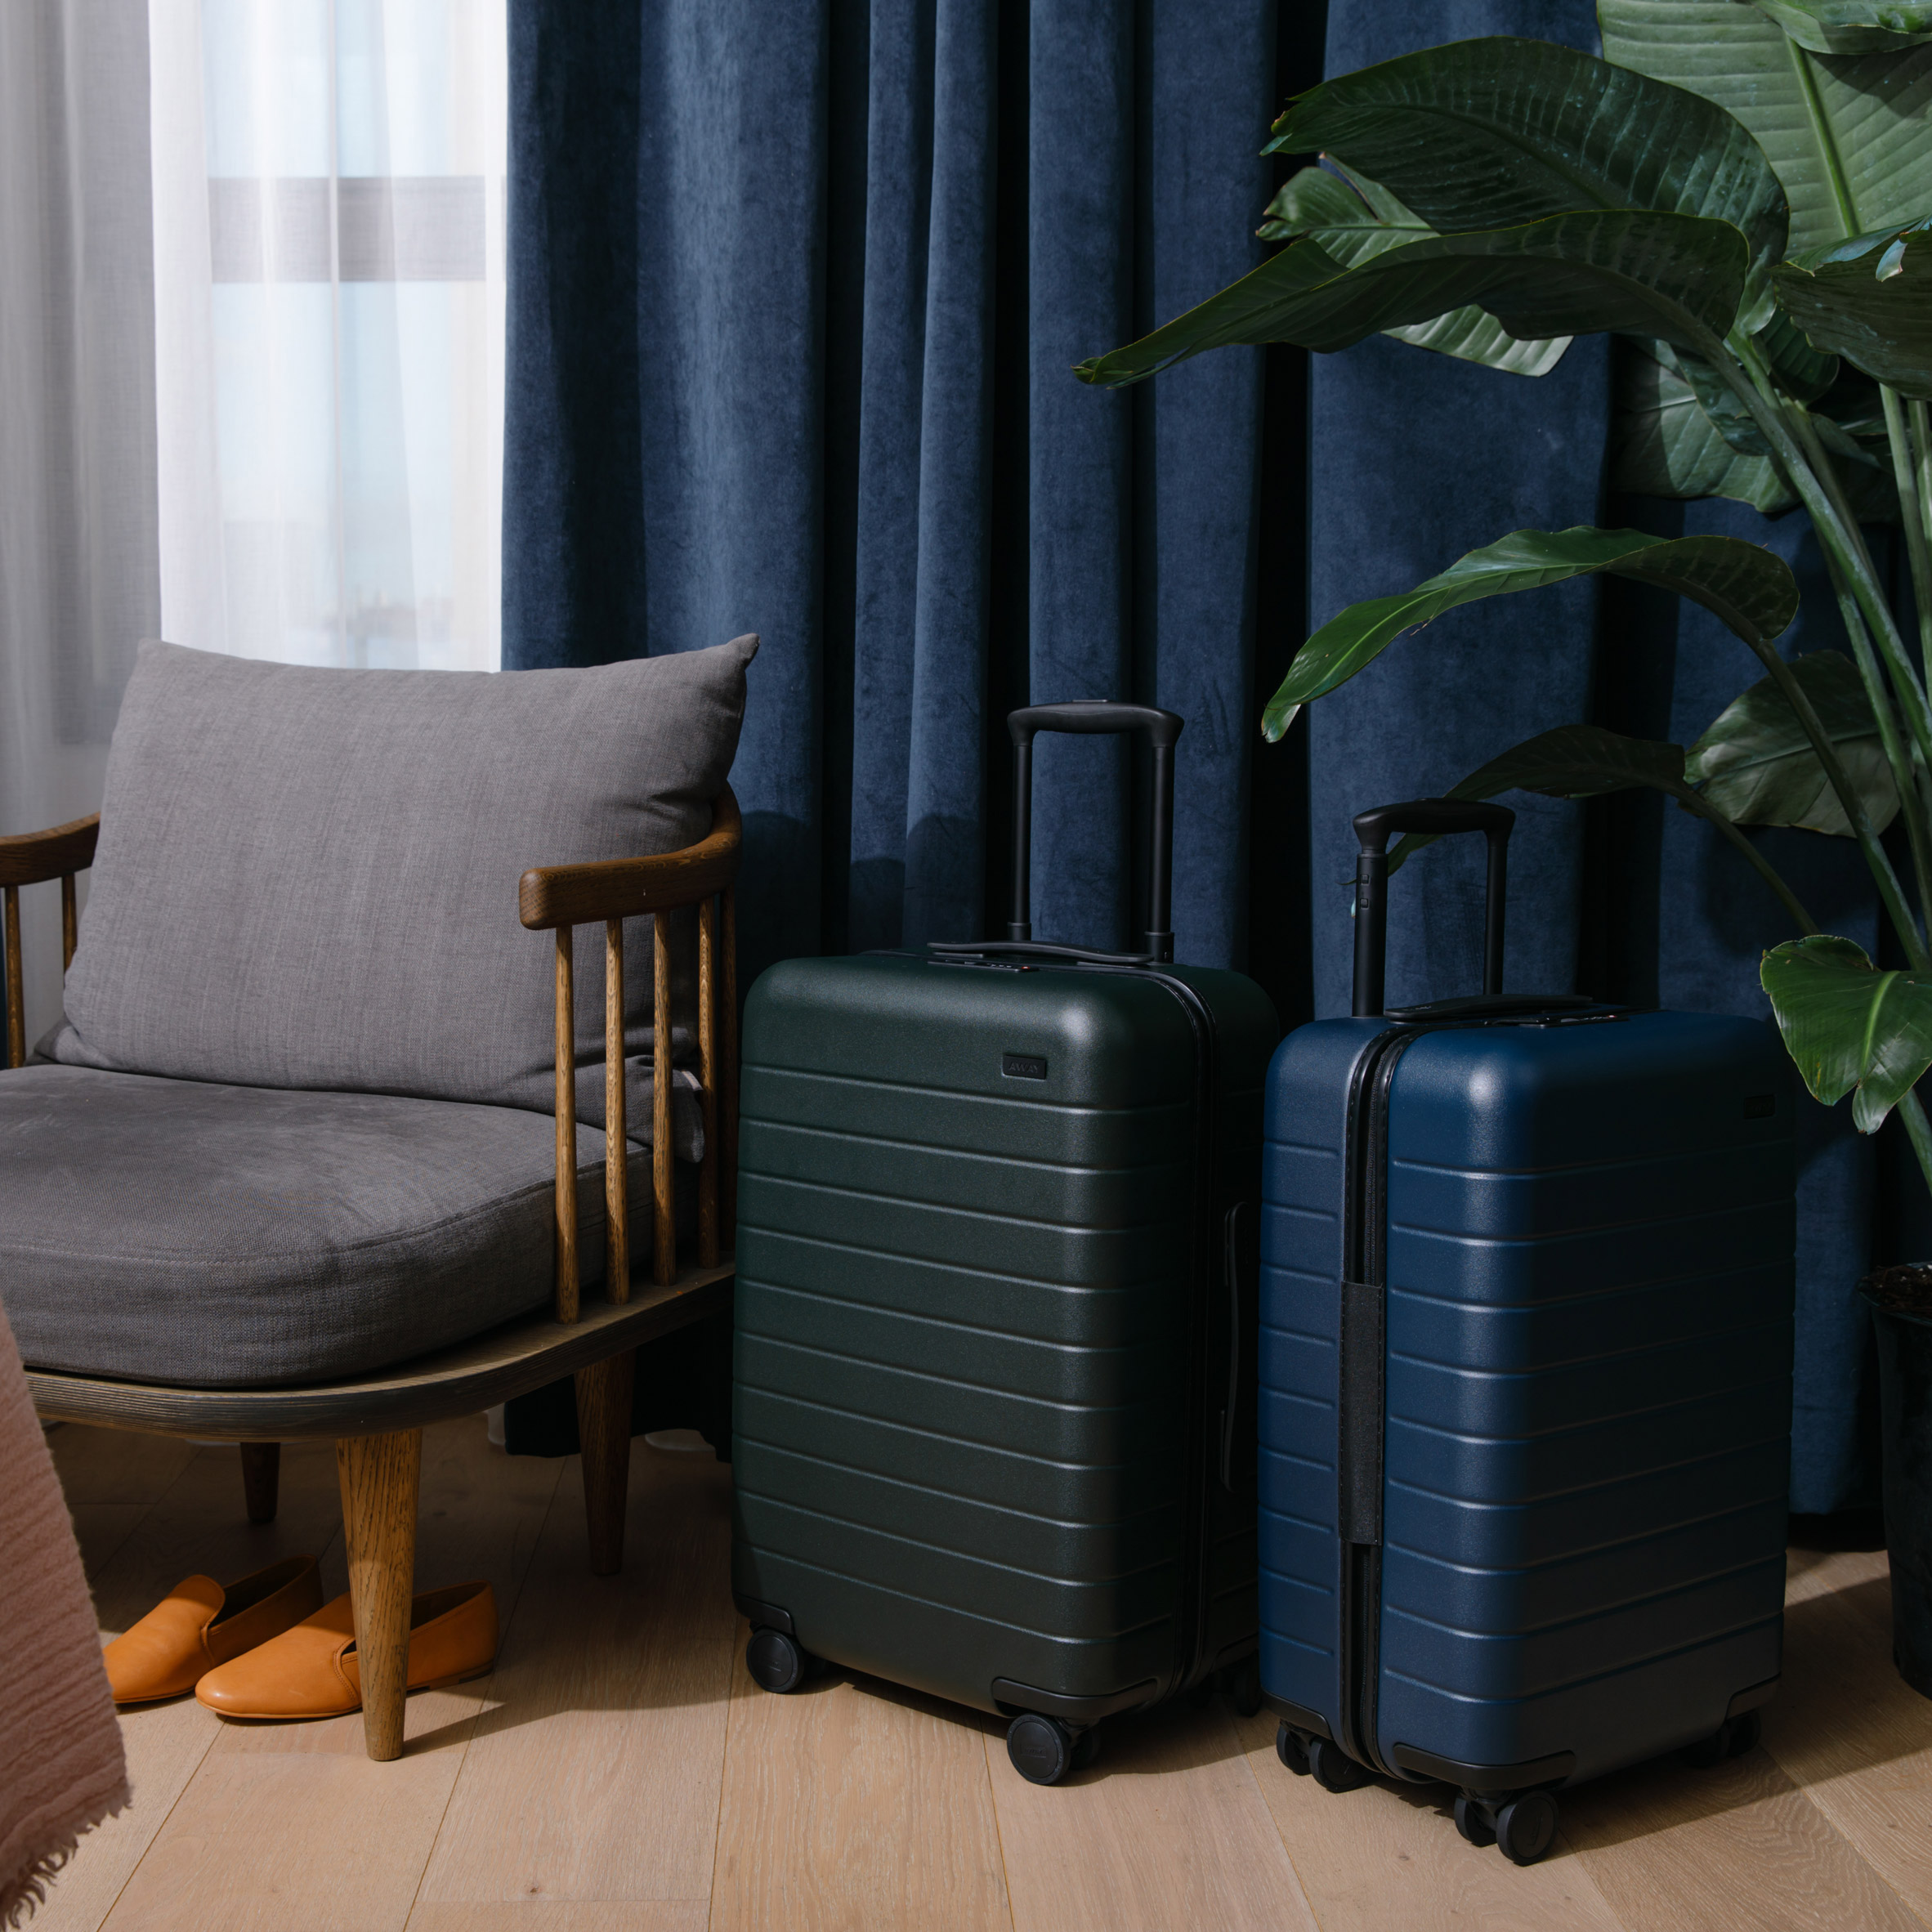 Competition: win a Bigger Carry-On suitcase from Away